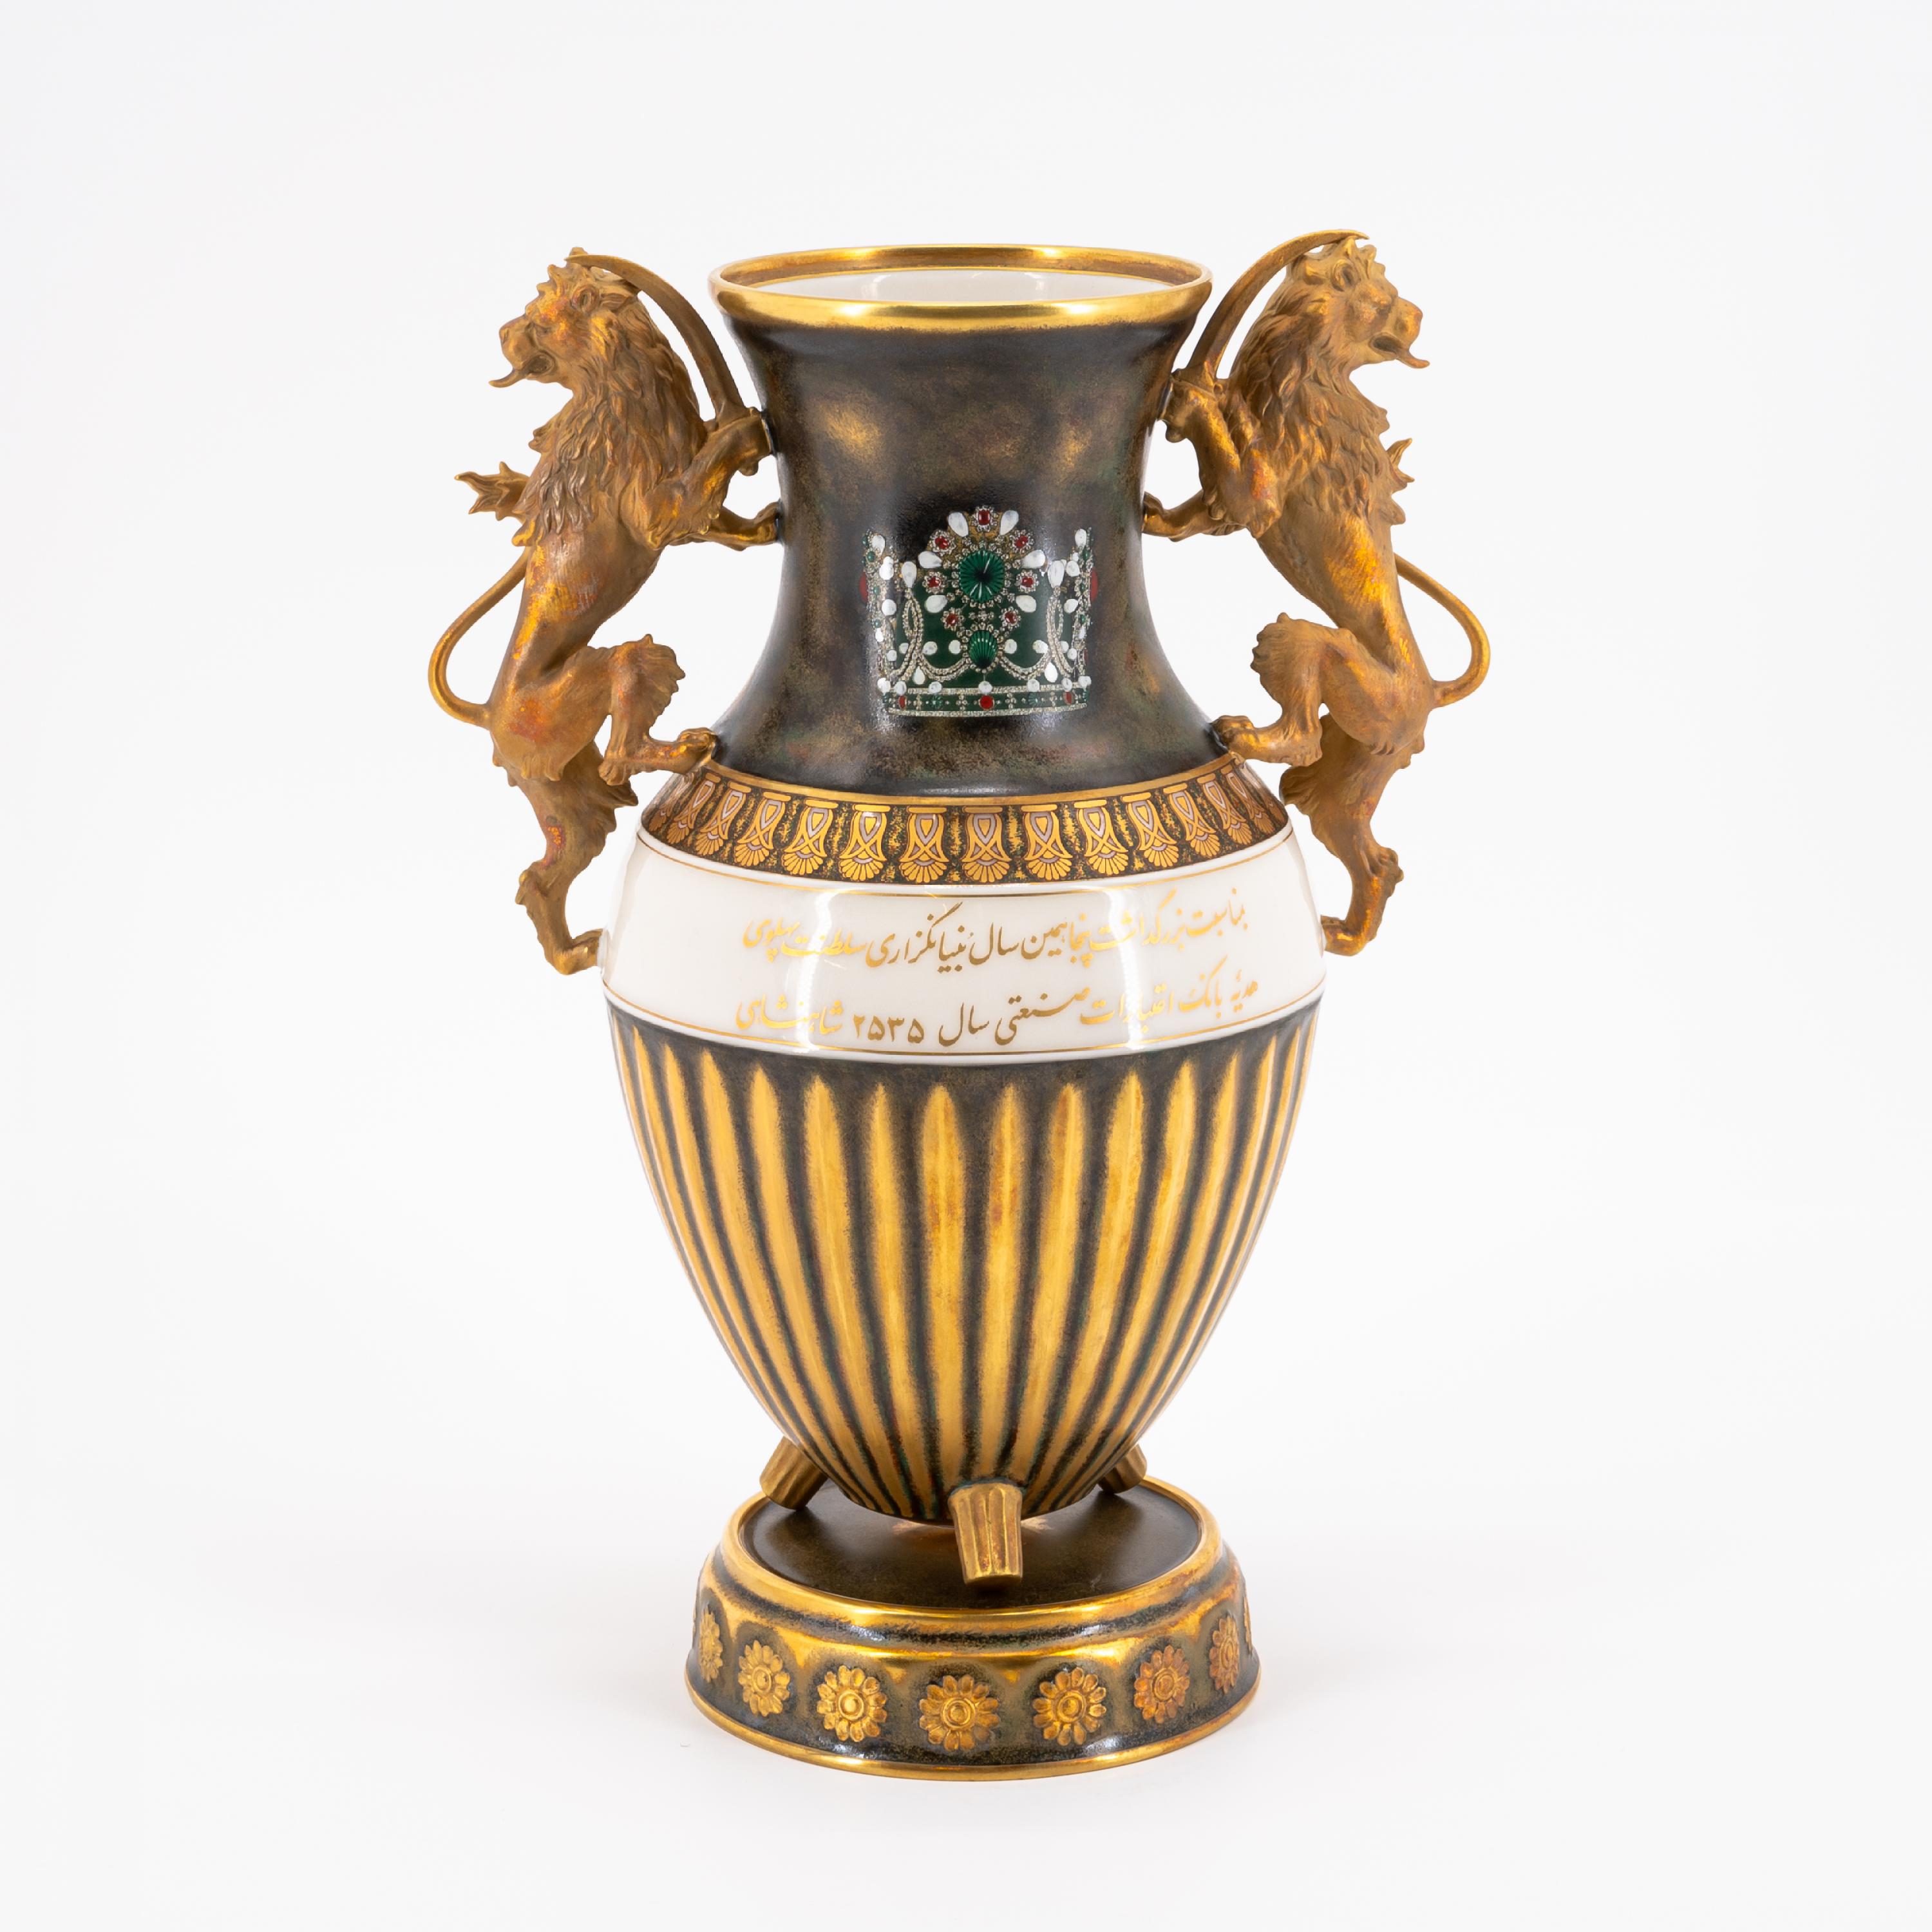 PORCELAIN JUBILEE VASE ON THE OCCASION OF THE VISIT OF THE SPA OF PERSIA - Image 4 of 7